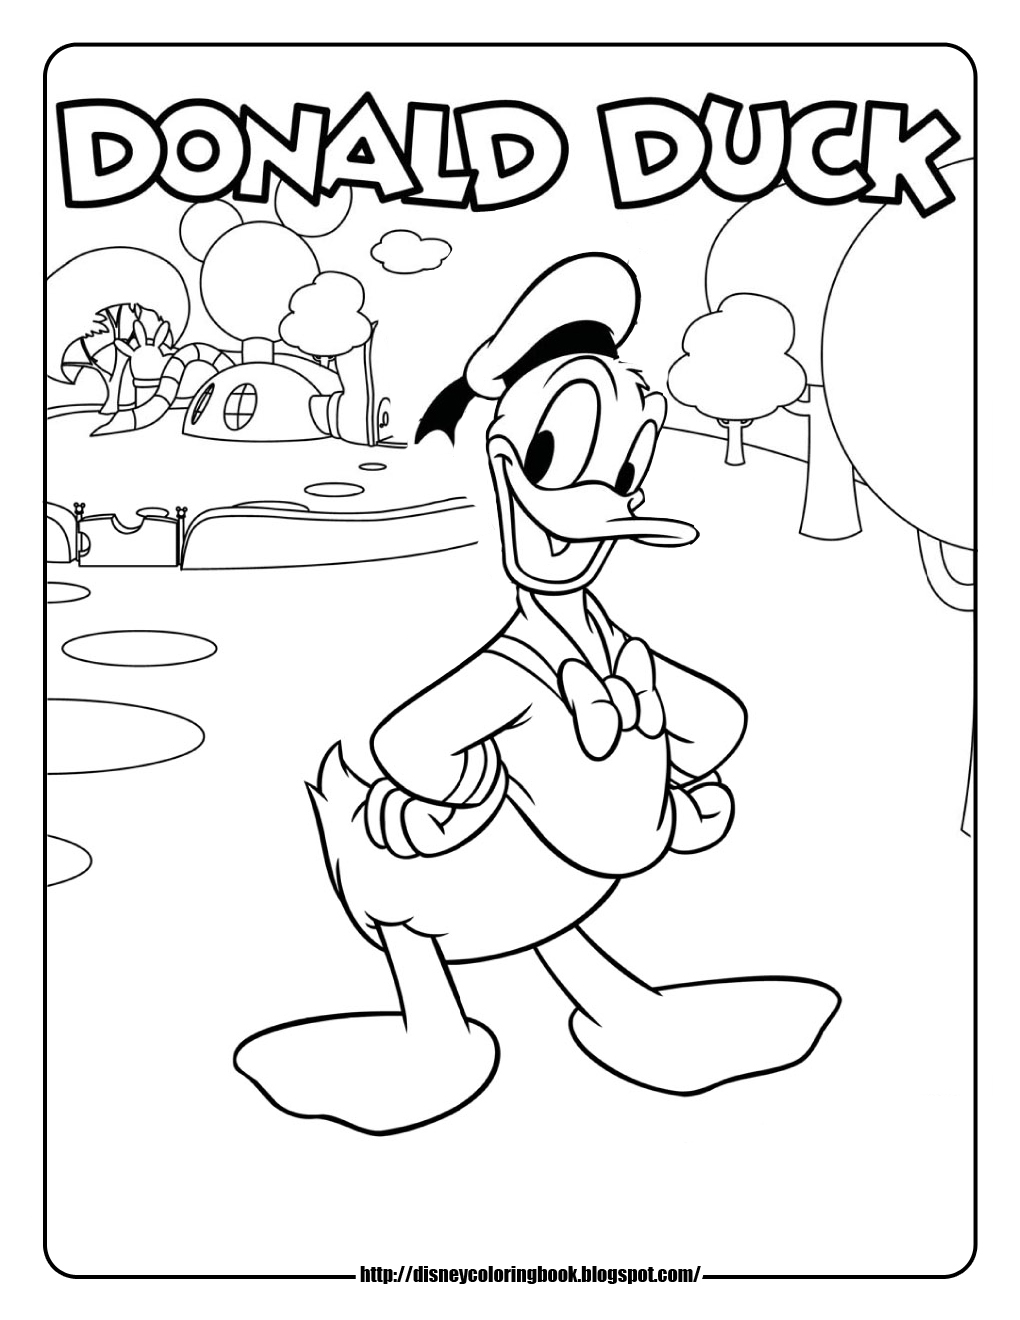 Download Disney Coloring Pages and Sheets for Kids: Mickey Mouse ...